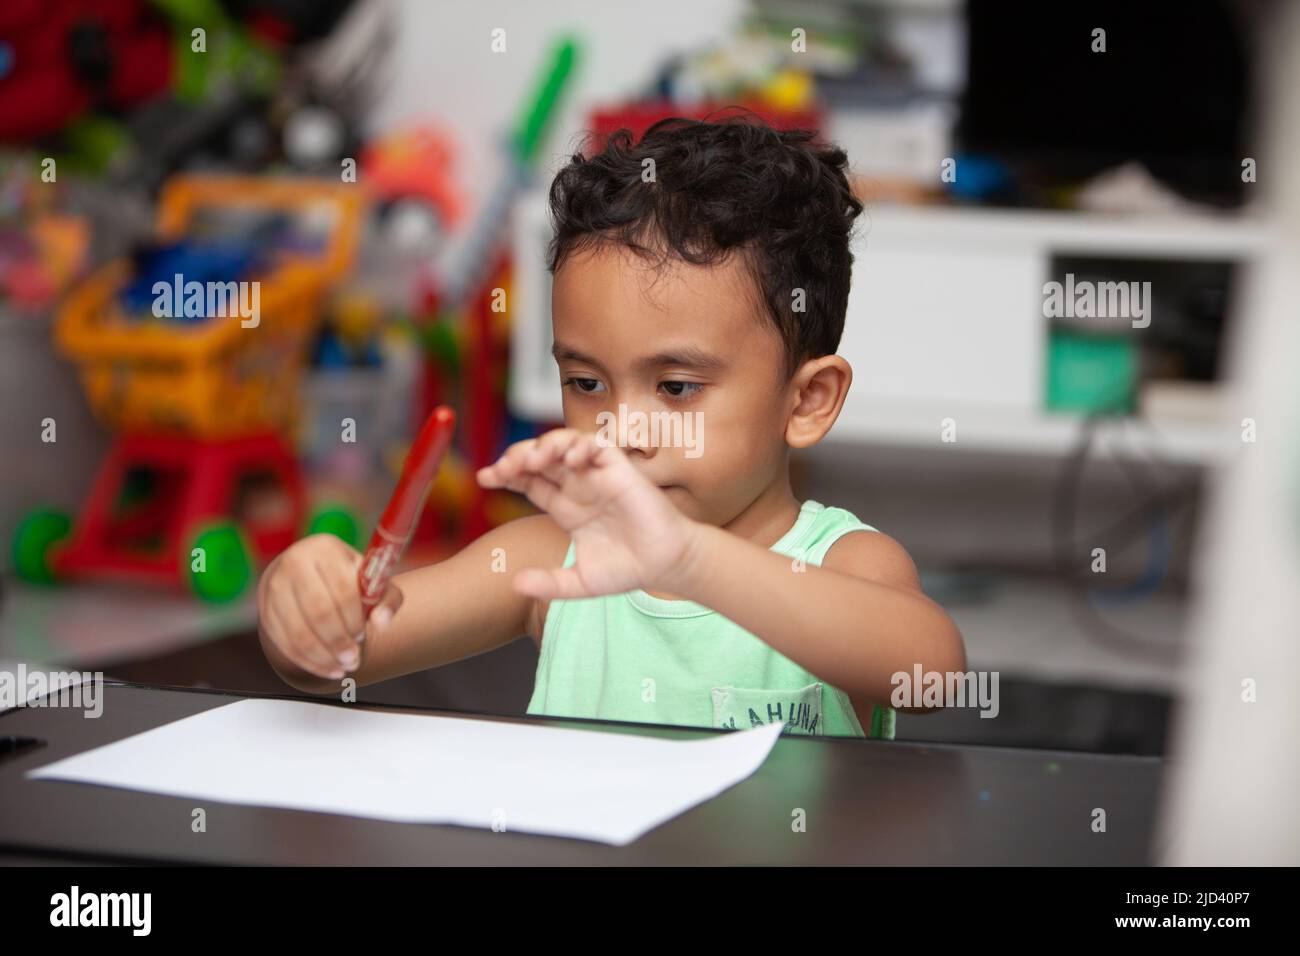 An Indonesian young boy in a light green t-shirt holding a red crayon to color a white sheet of paper on a black table in the living room Stock Photo